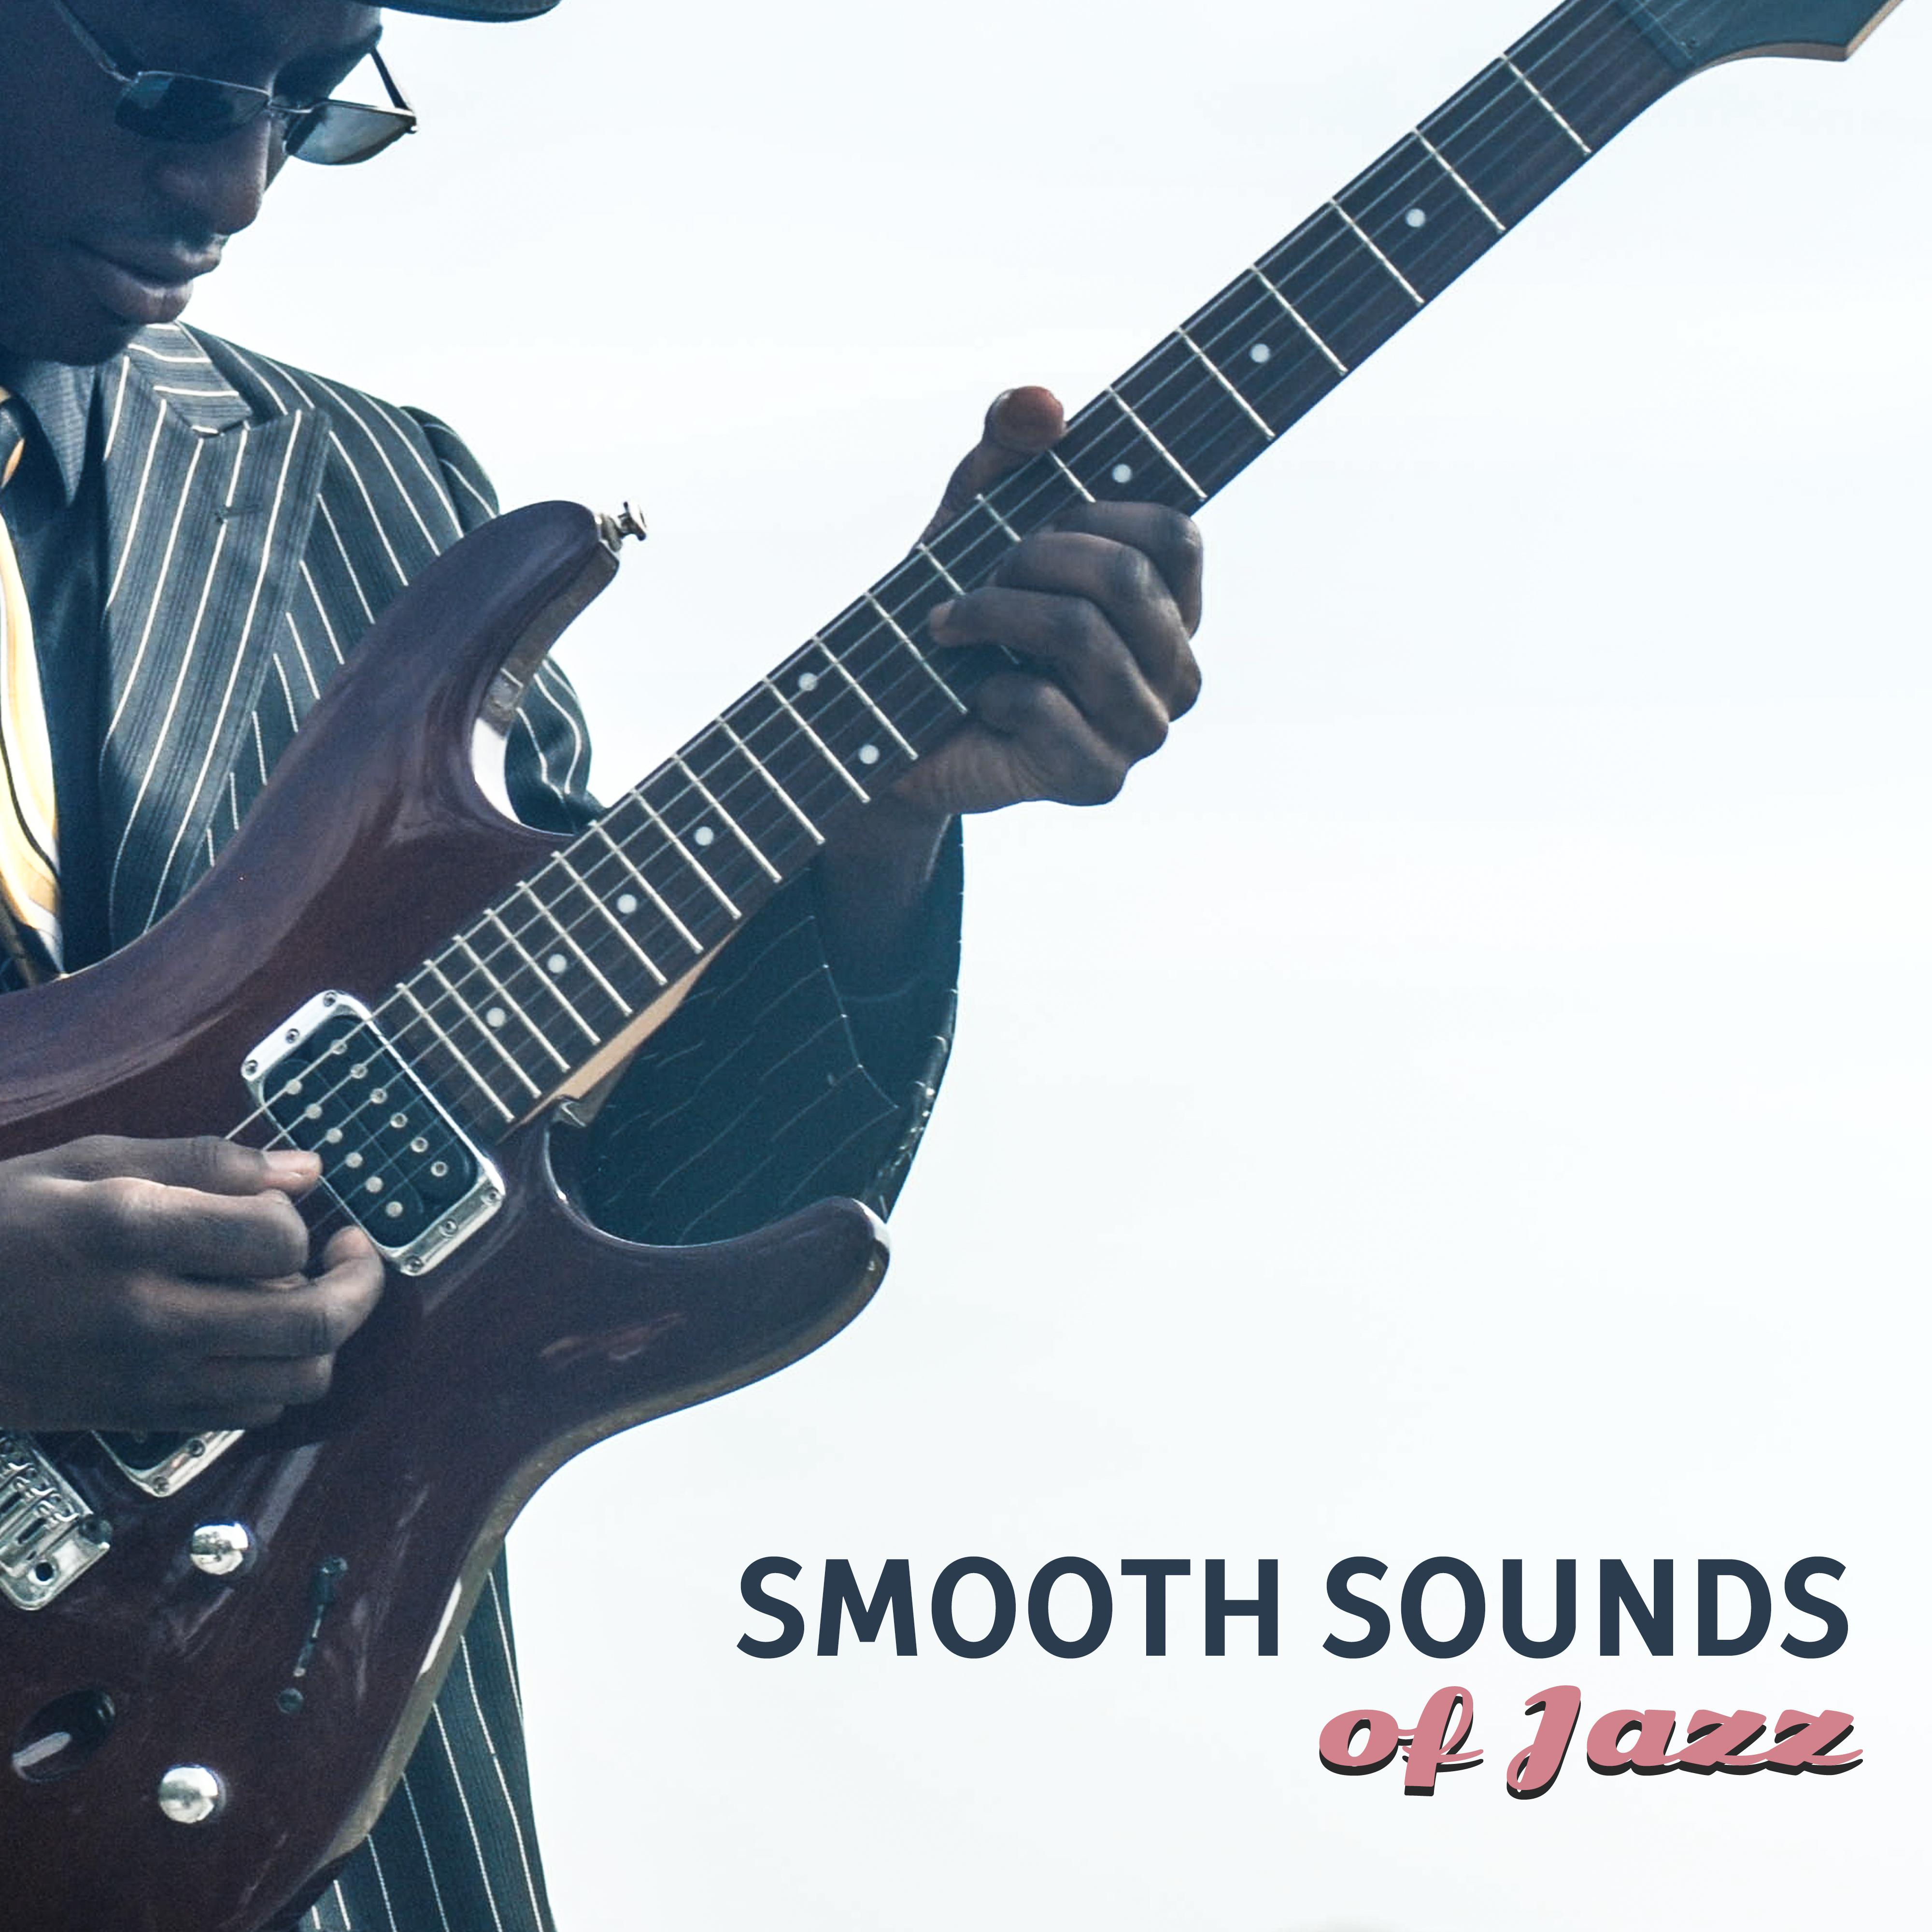 Smooth Sounds of Jazz  Easy Listening, Jazz Relaxation, Piano Sounds, Chilled Music